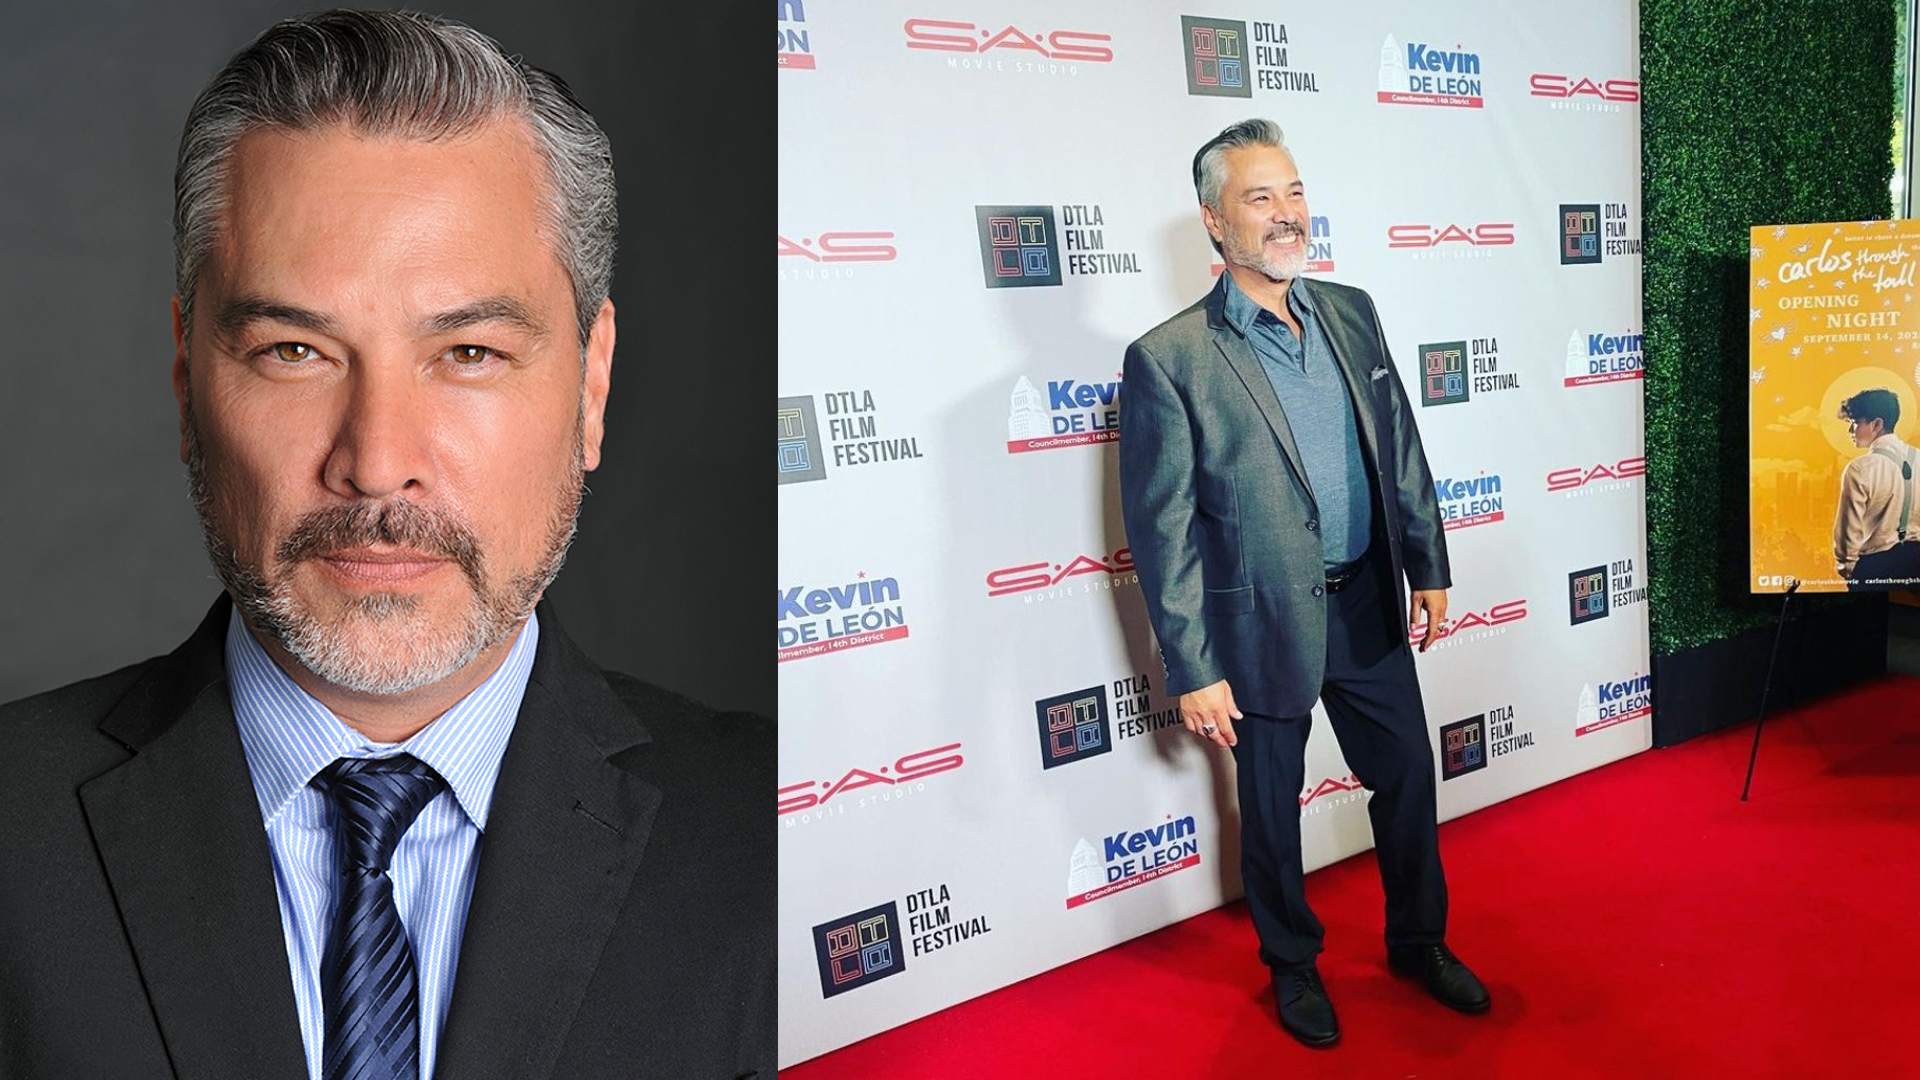 Entertainment Exclusive: Latest News on Award-Winning Actor, Producer of True Form Films & Shortcut2Hollywood – Mauricio Mendoza!